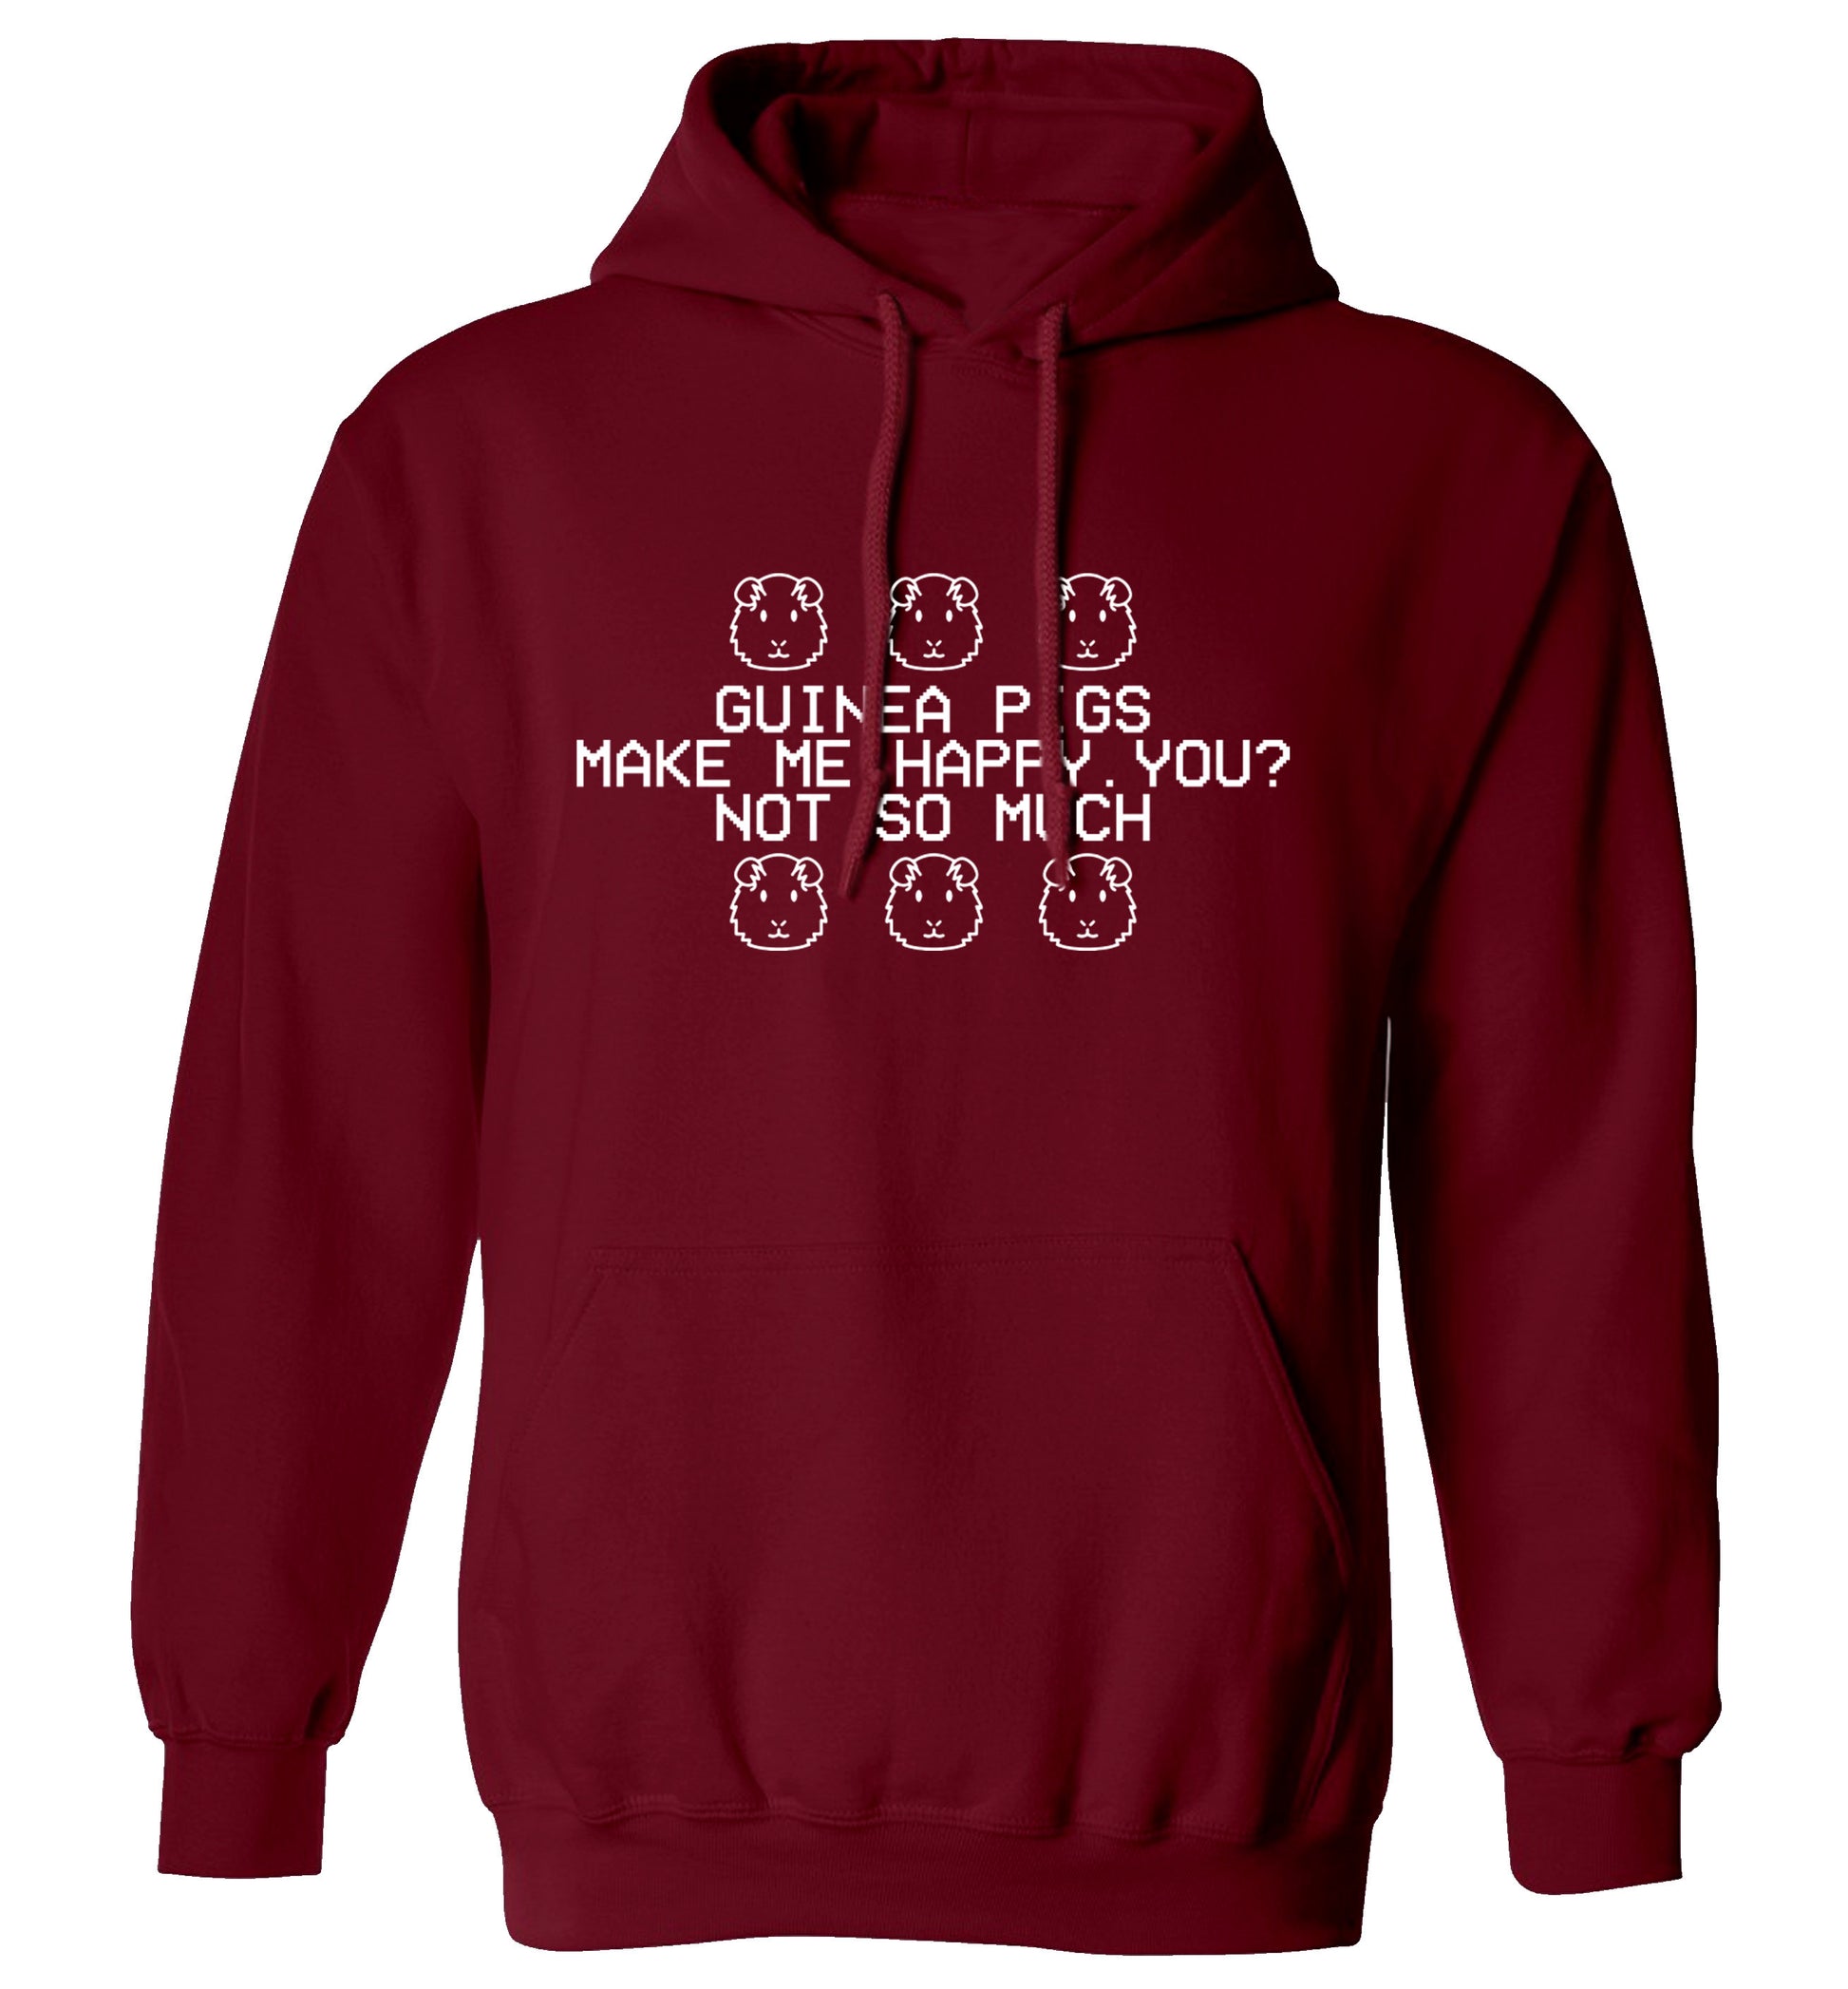 Guinea pigs make me happy, you not so much adults unisex maroon hoodie 2XL